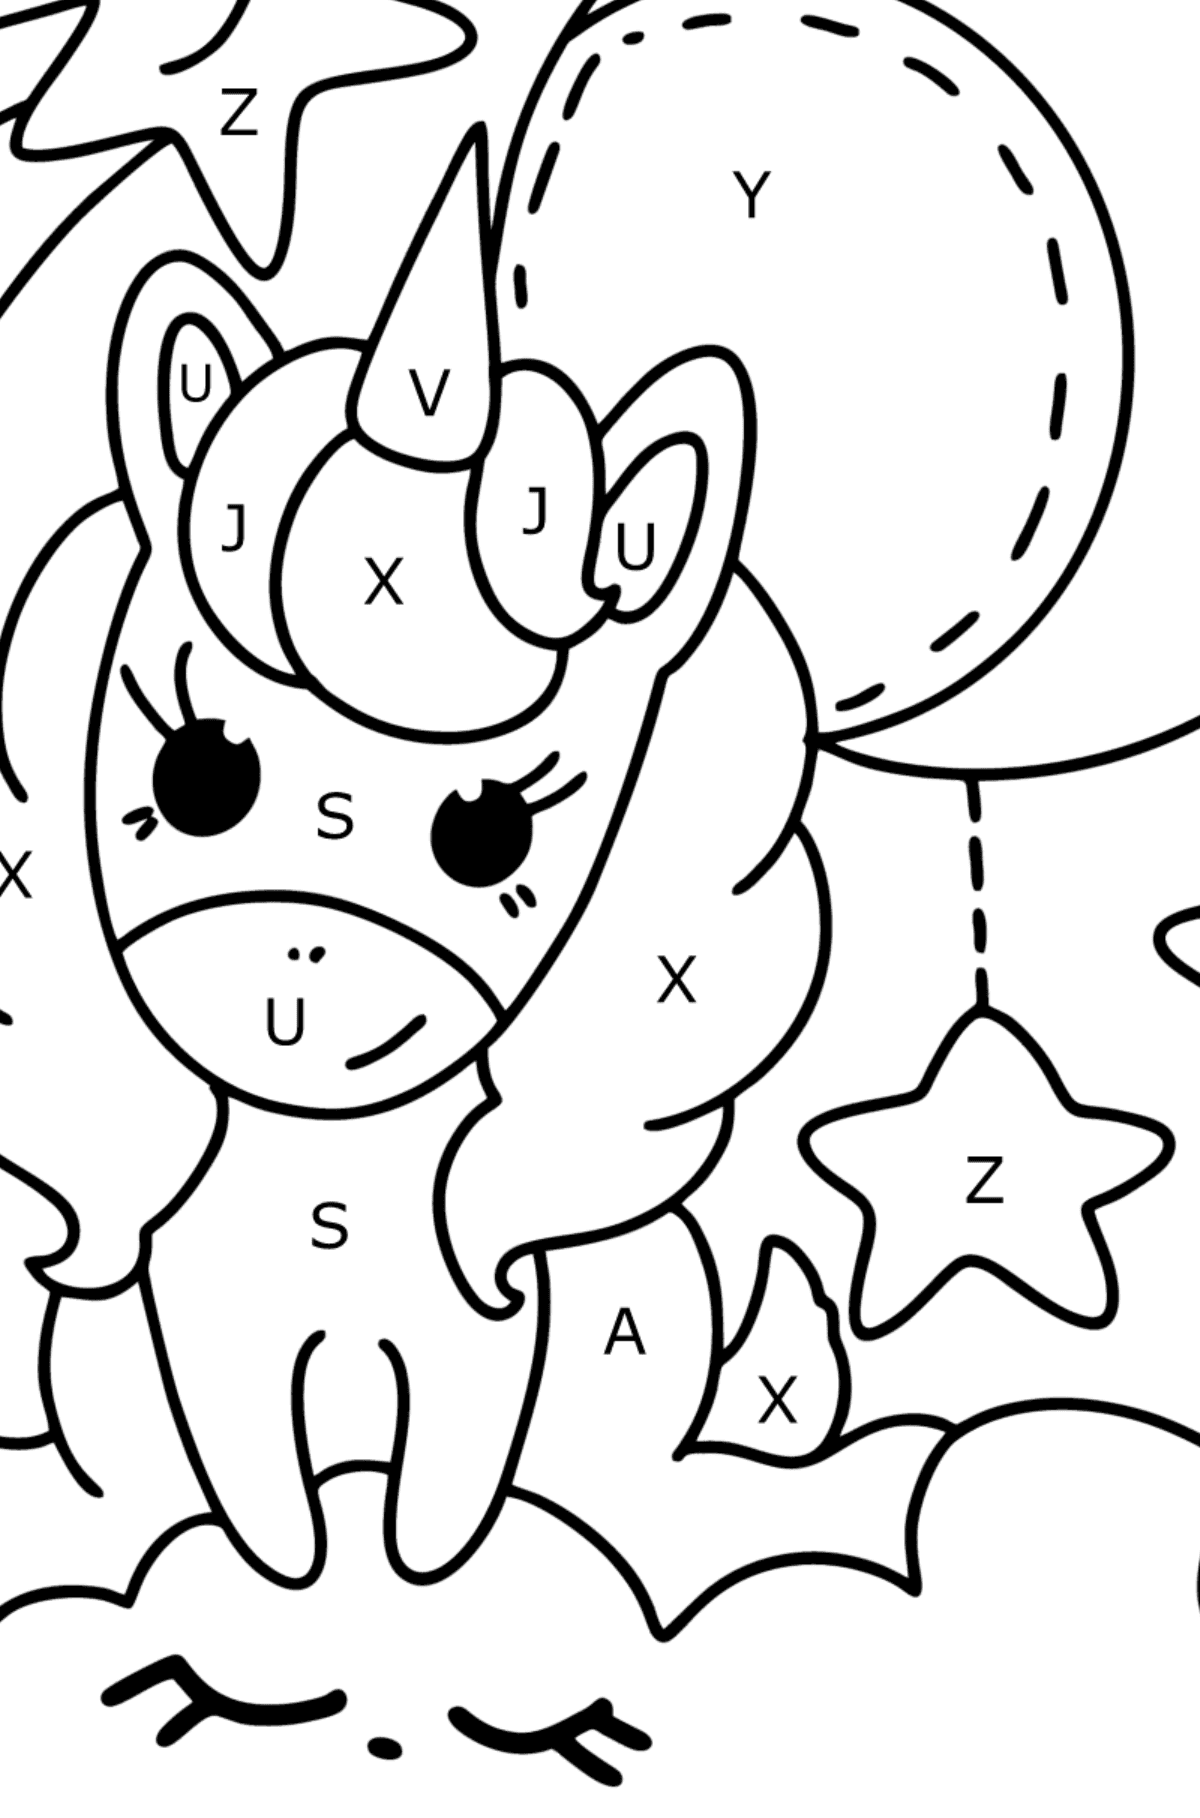 Moon unicorn coloring page - Coloring by Letters for Kids